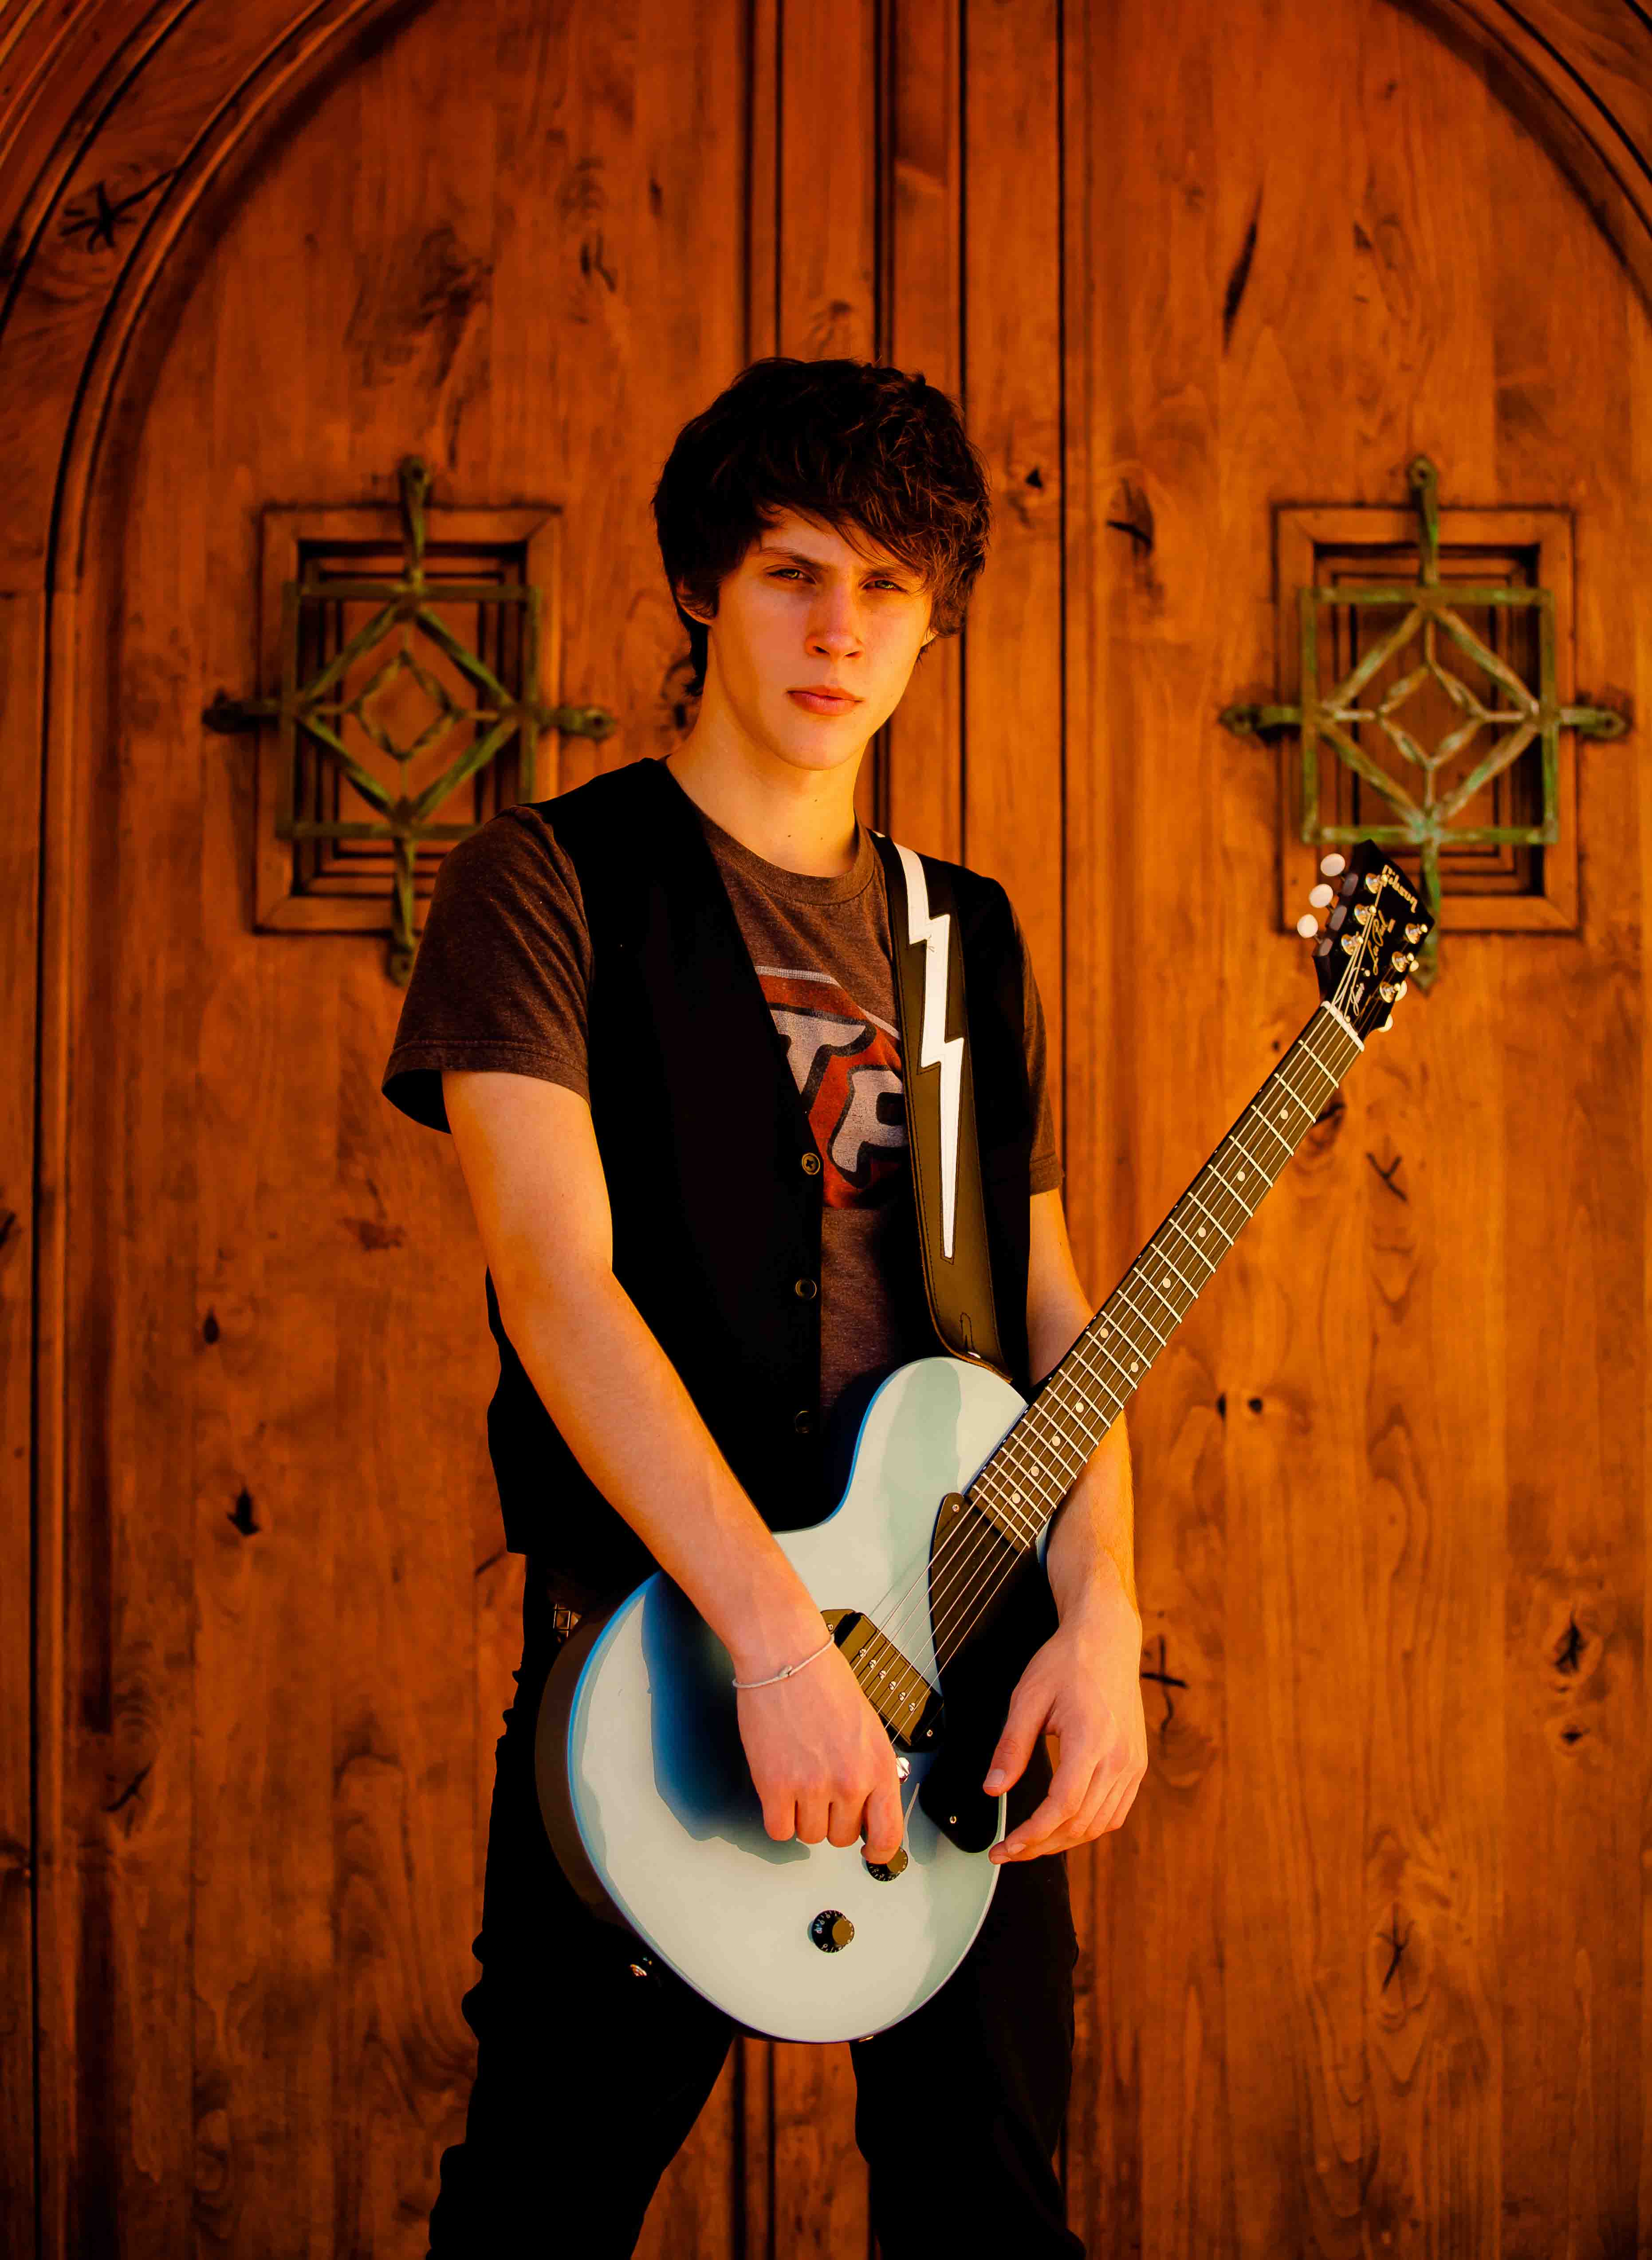 Cameron also write and records songs. Posed here with his newest guitar, a 